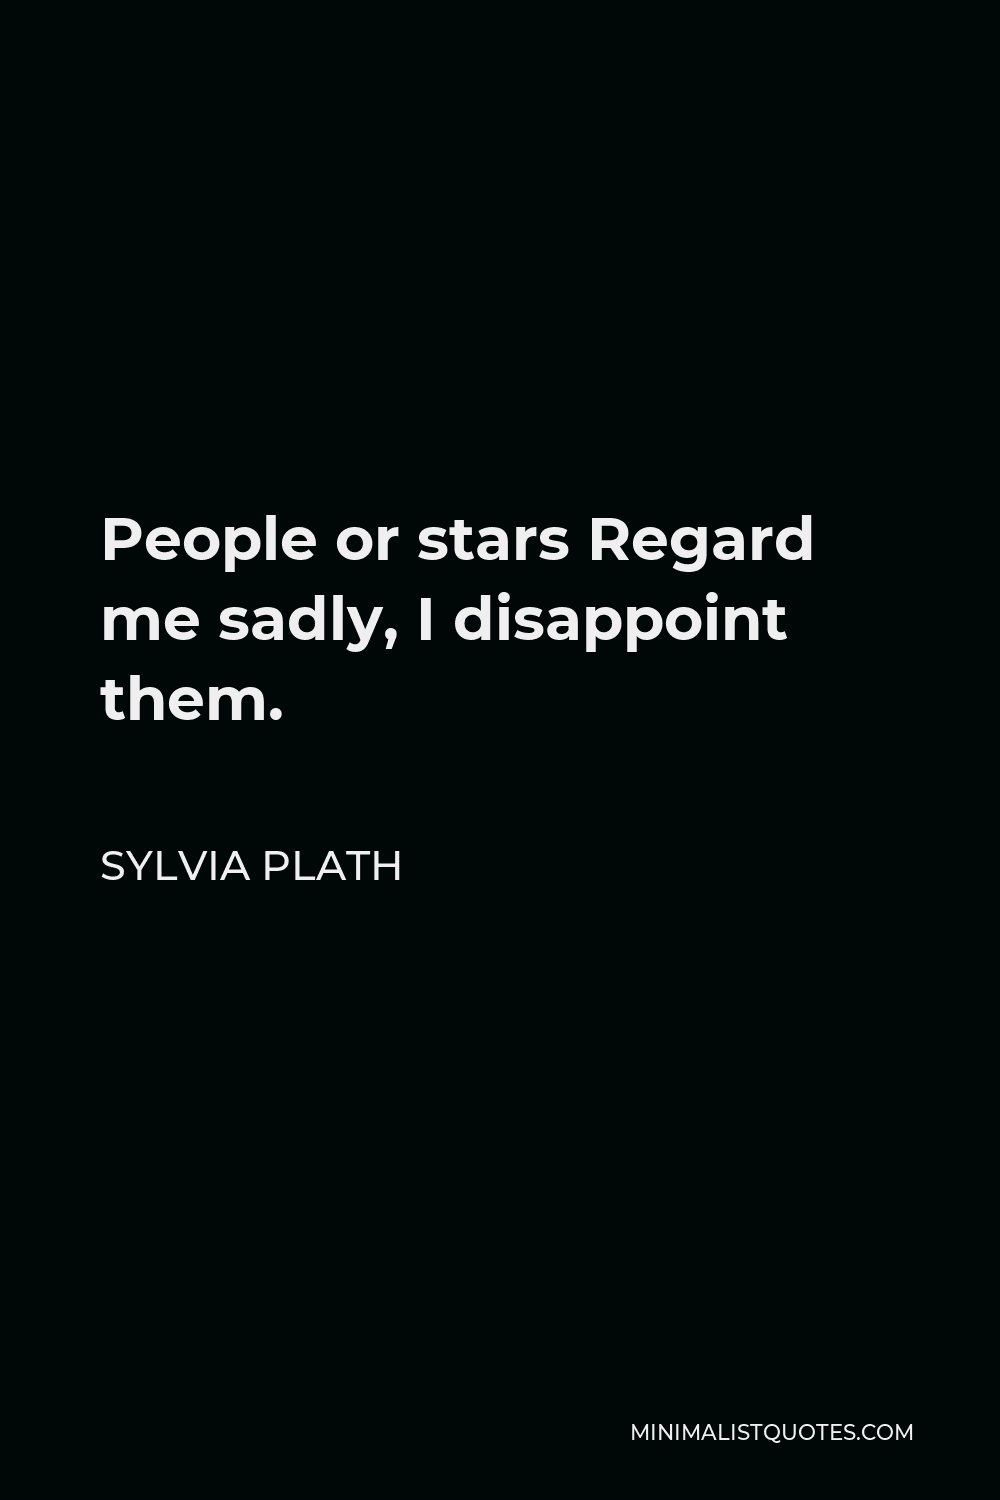 Sylvia Plath Quote - People or stars Regard me sadly, I disappoint them.